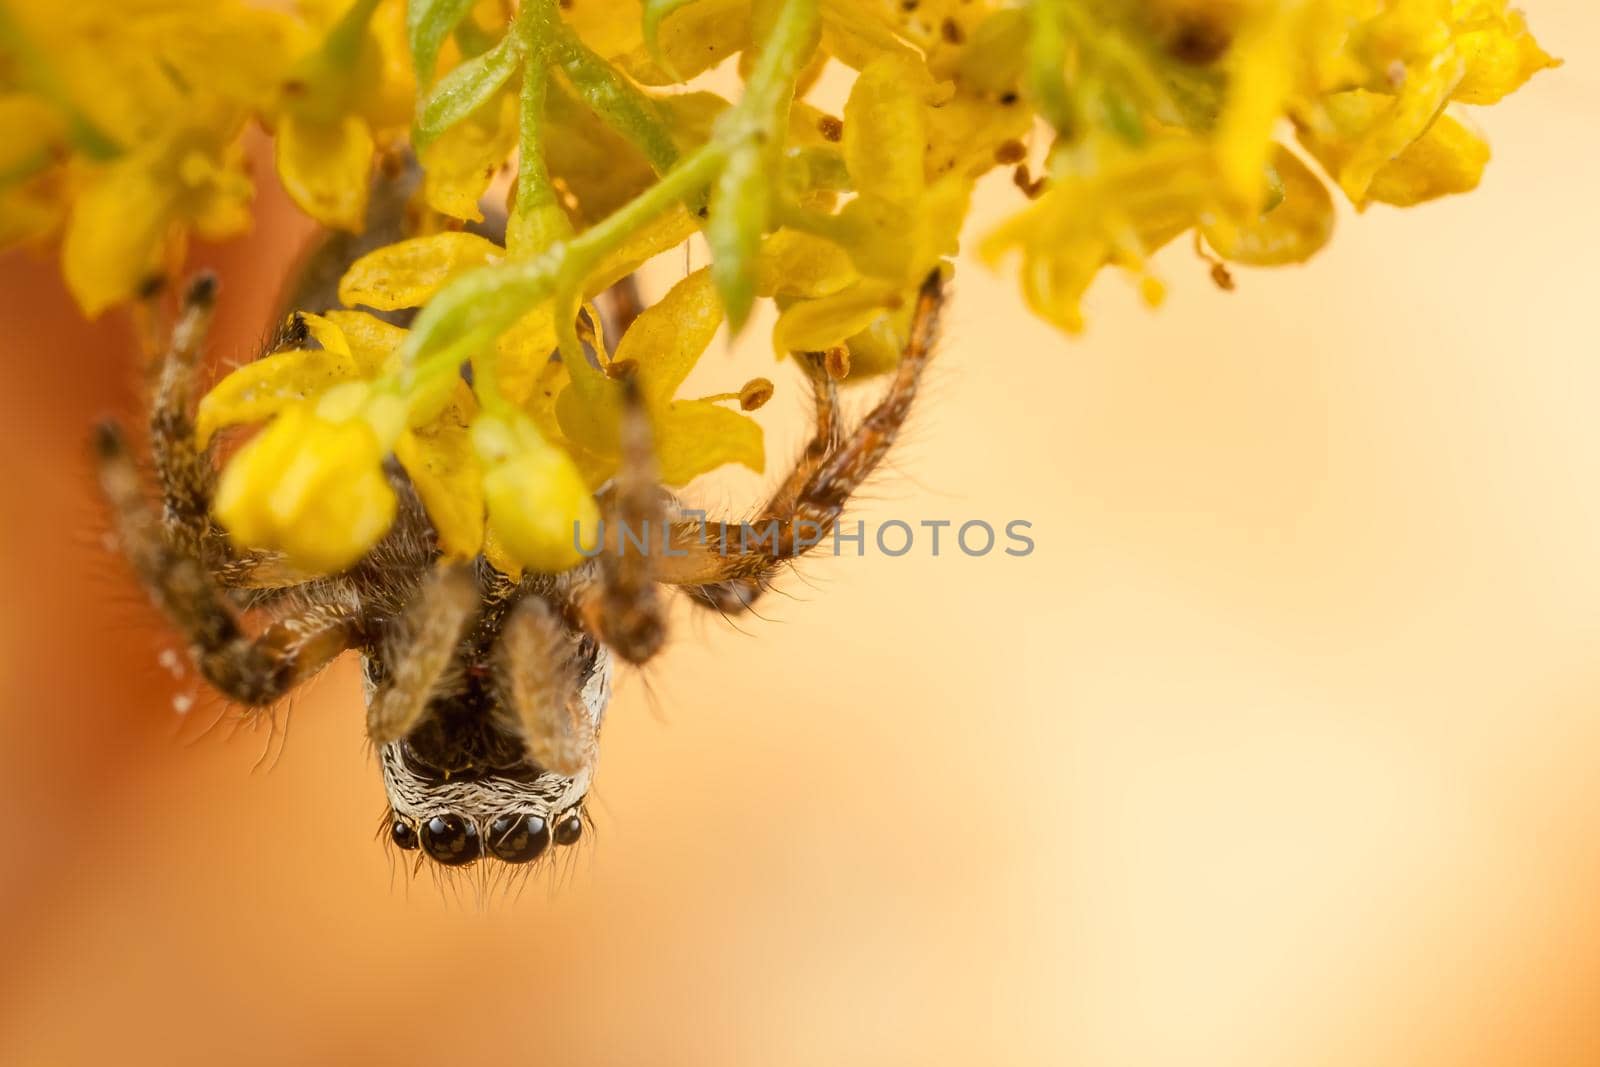 Jumping spider on the yellow flowers in an orange background by Lincikas